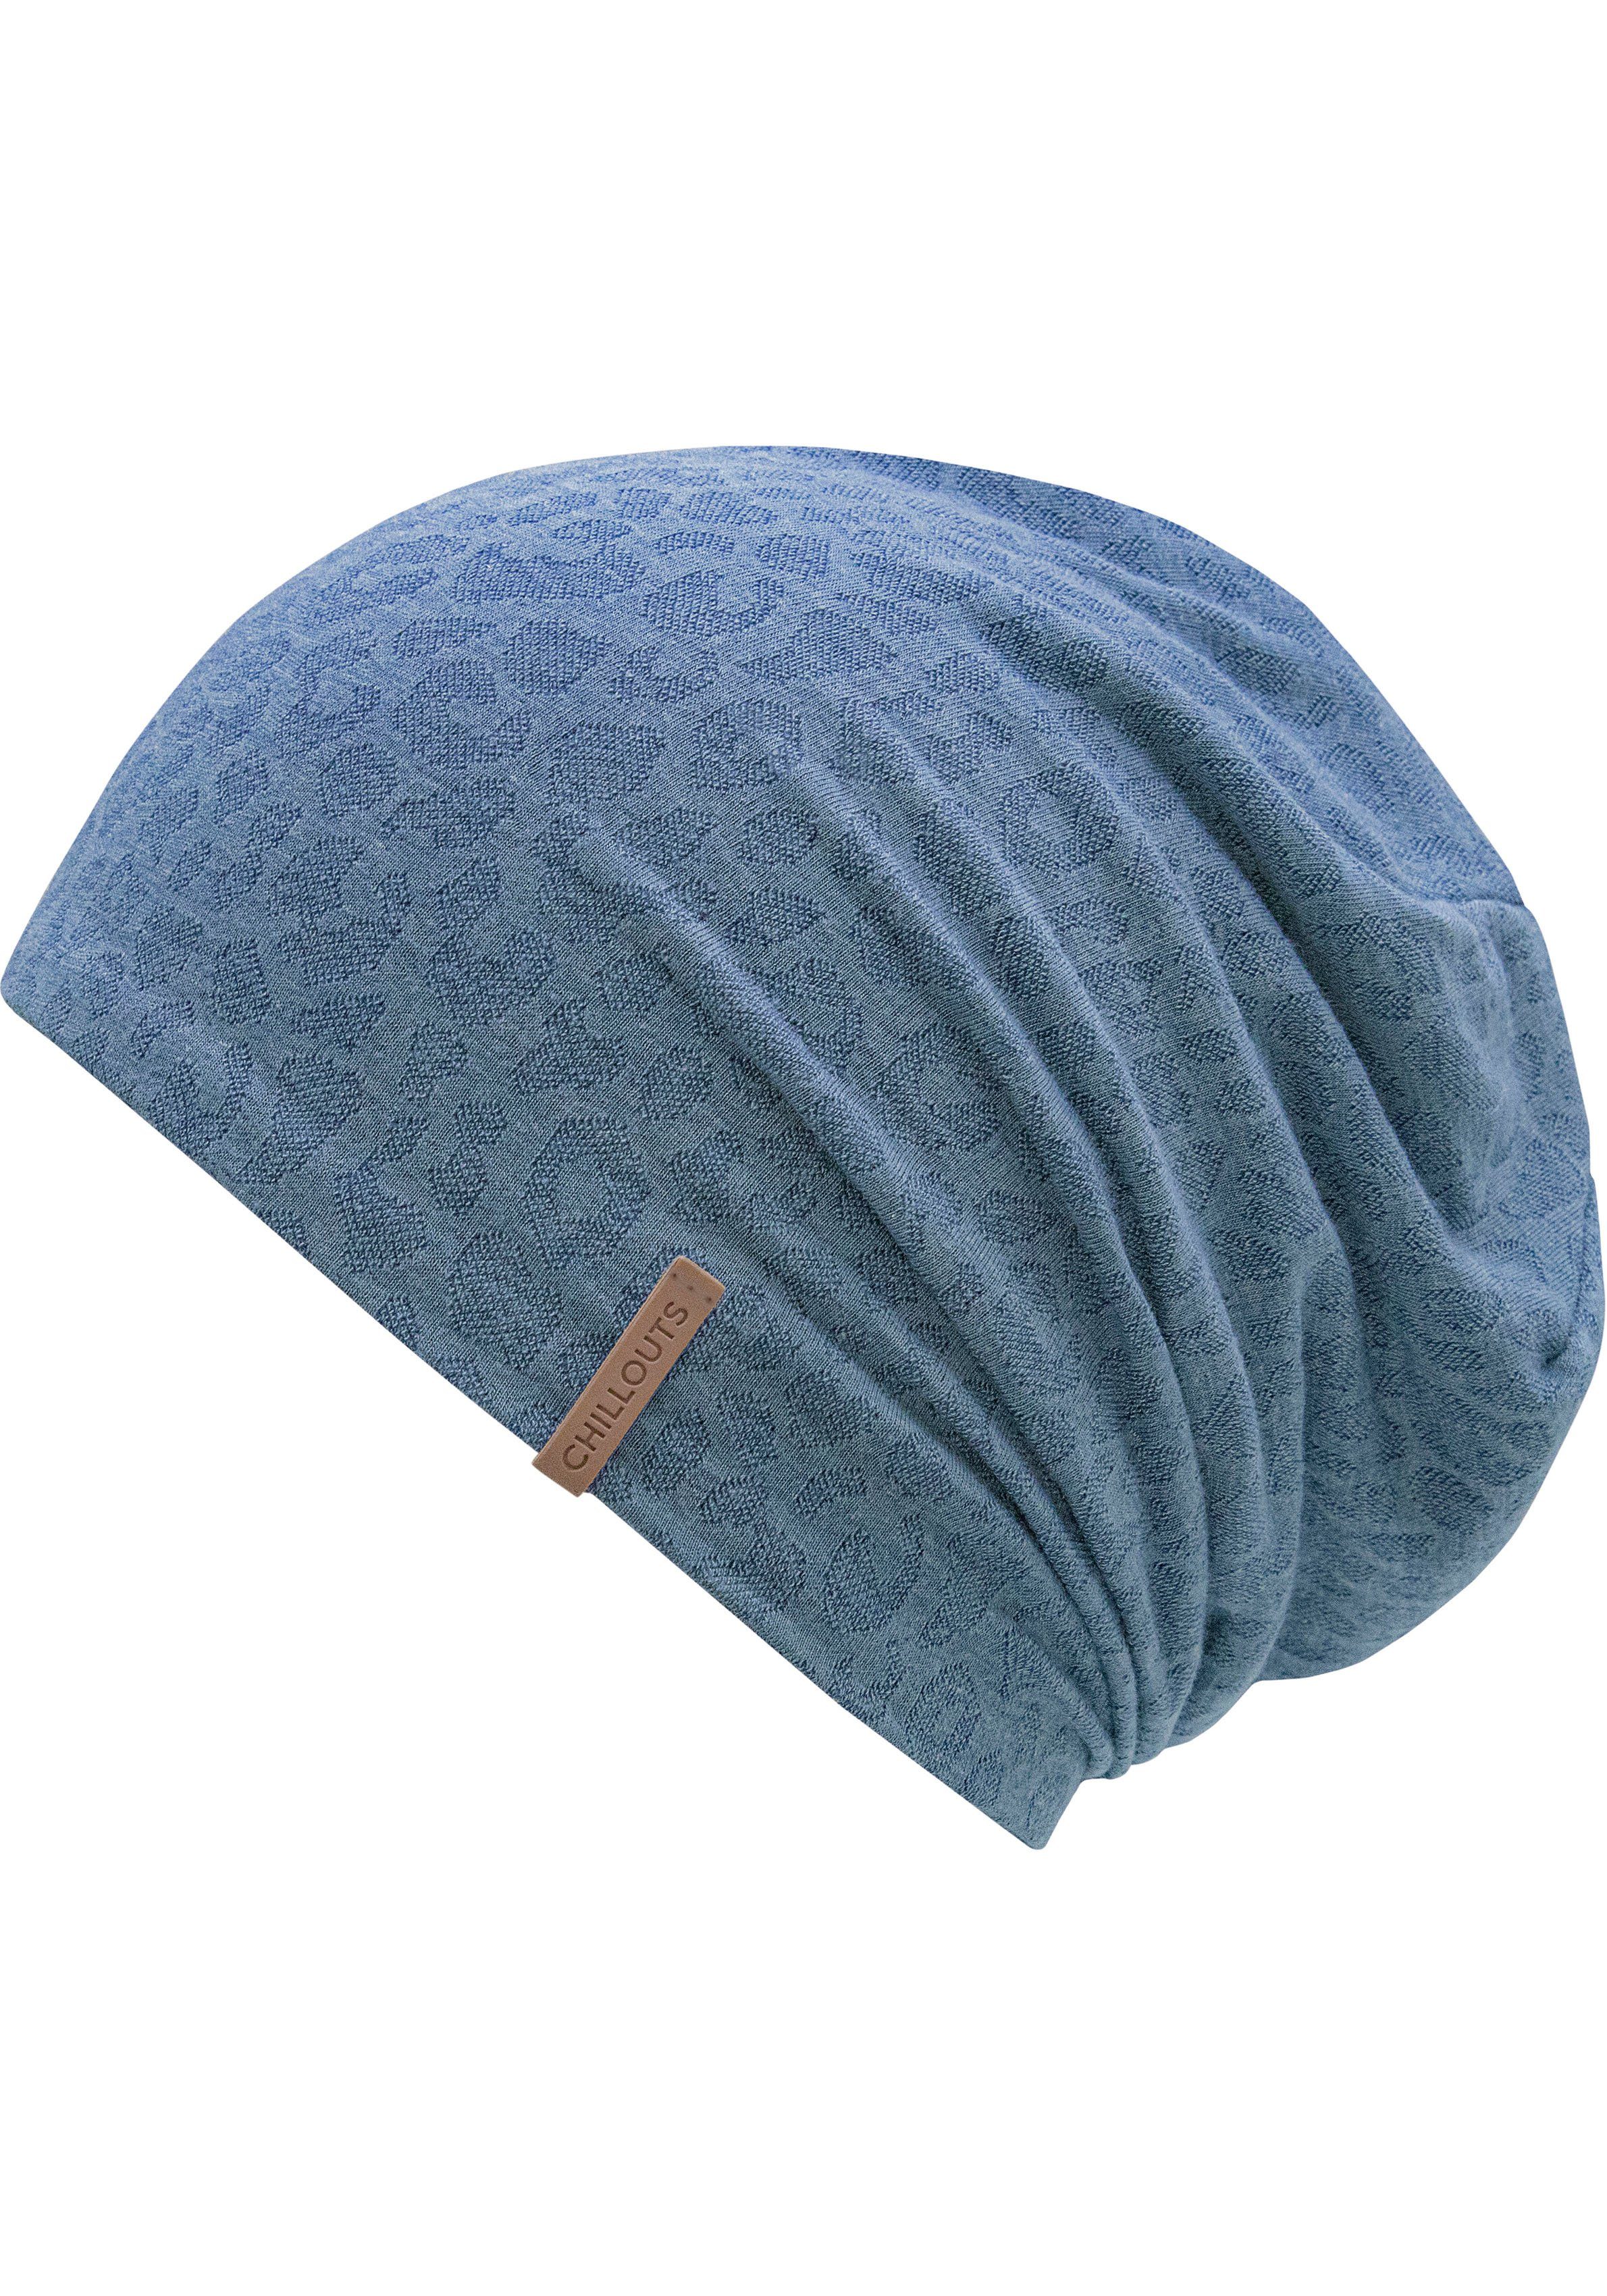 jeans chillouts Rochester Beanie Hat